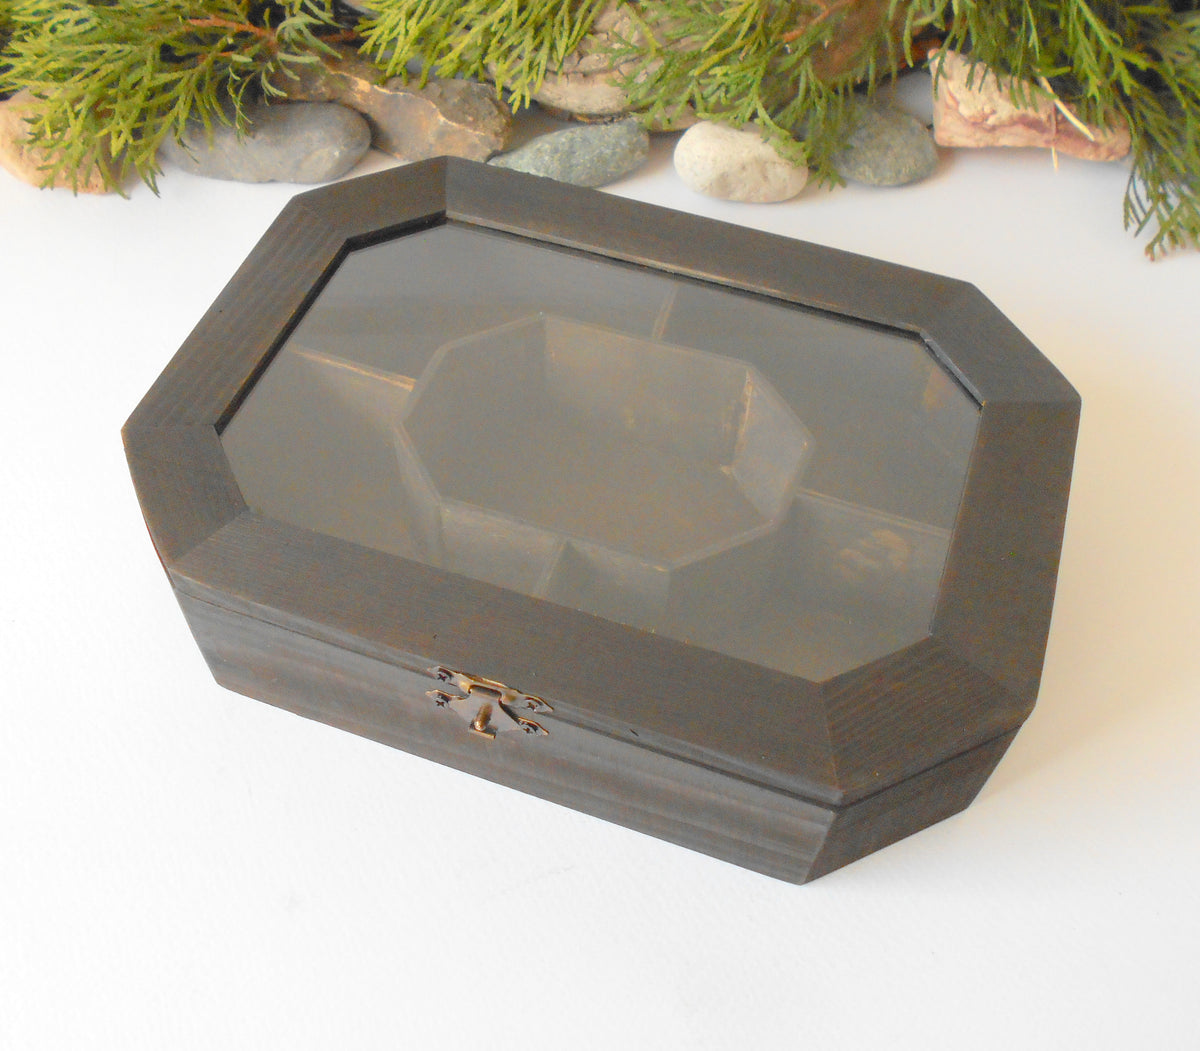 This is a wooden box with a glass display that is made of pinewood and that has metal hinges and closes with a bronze-color closing that may display various things like jewelry, miniatures, crystals, or other small objects of importance to you or your friends. &lt;span data-mce-fragment=&quot;1&quot;&gt;I have colored the box with mordant so that it looks like an old wood vintage box with a dark brow color.&lt;/span&gt;